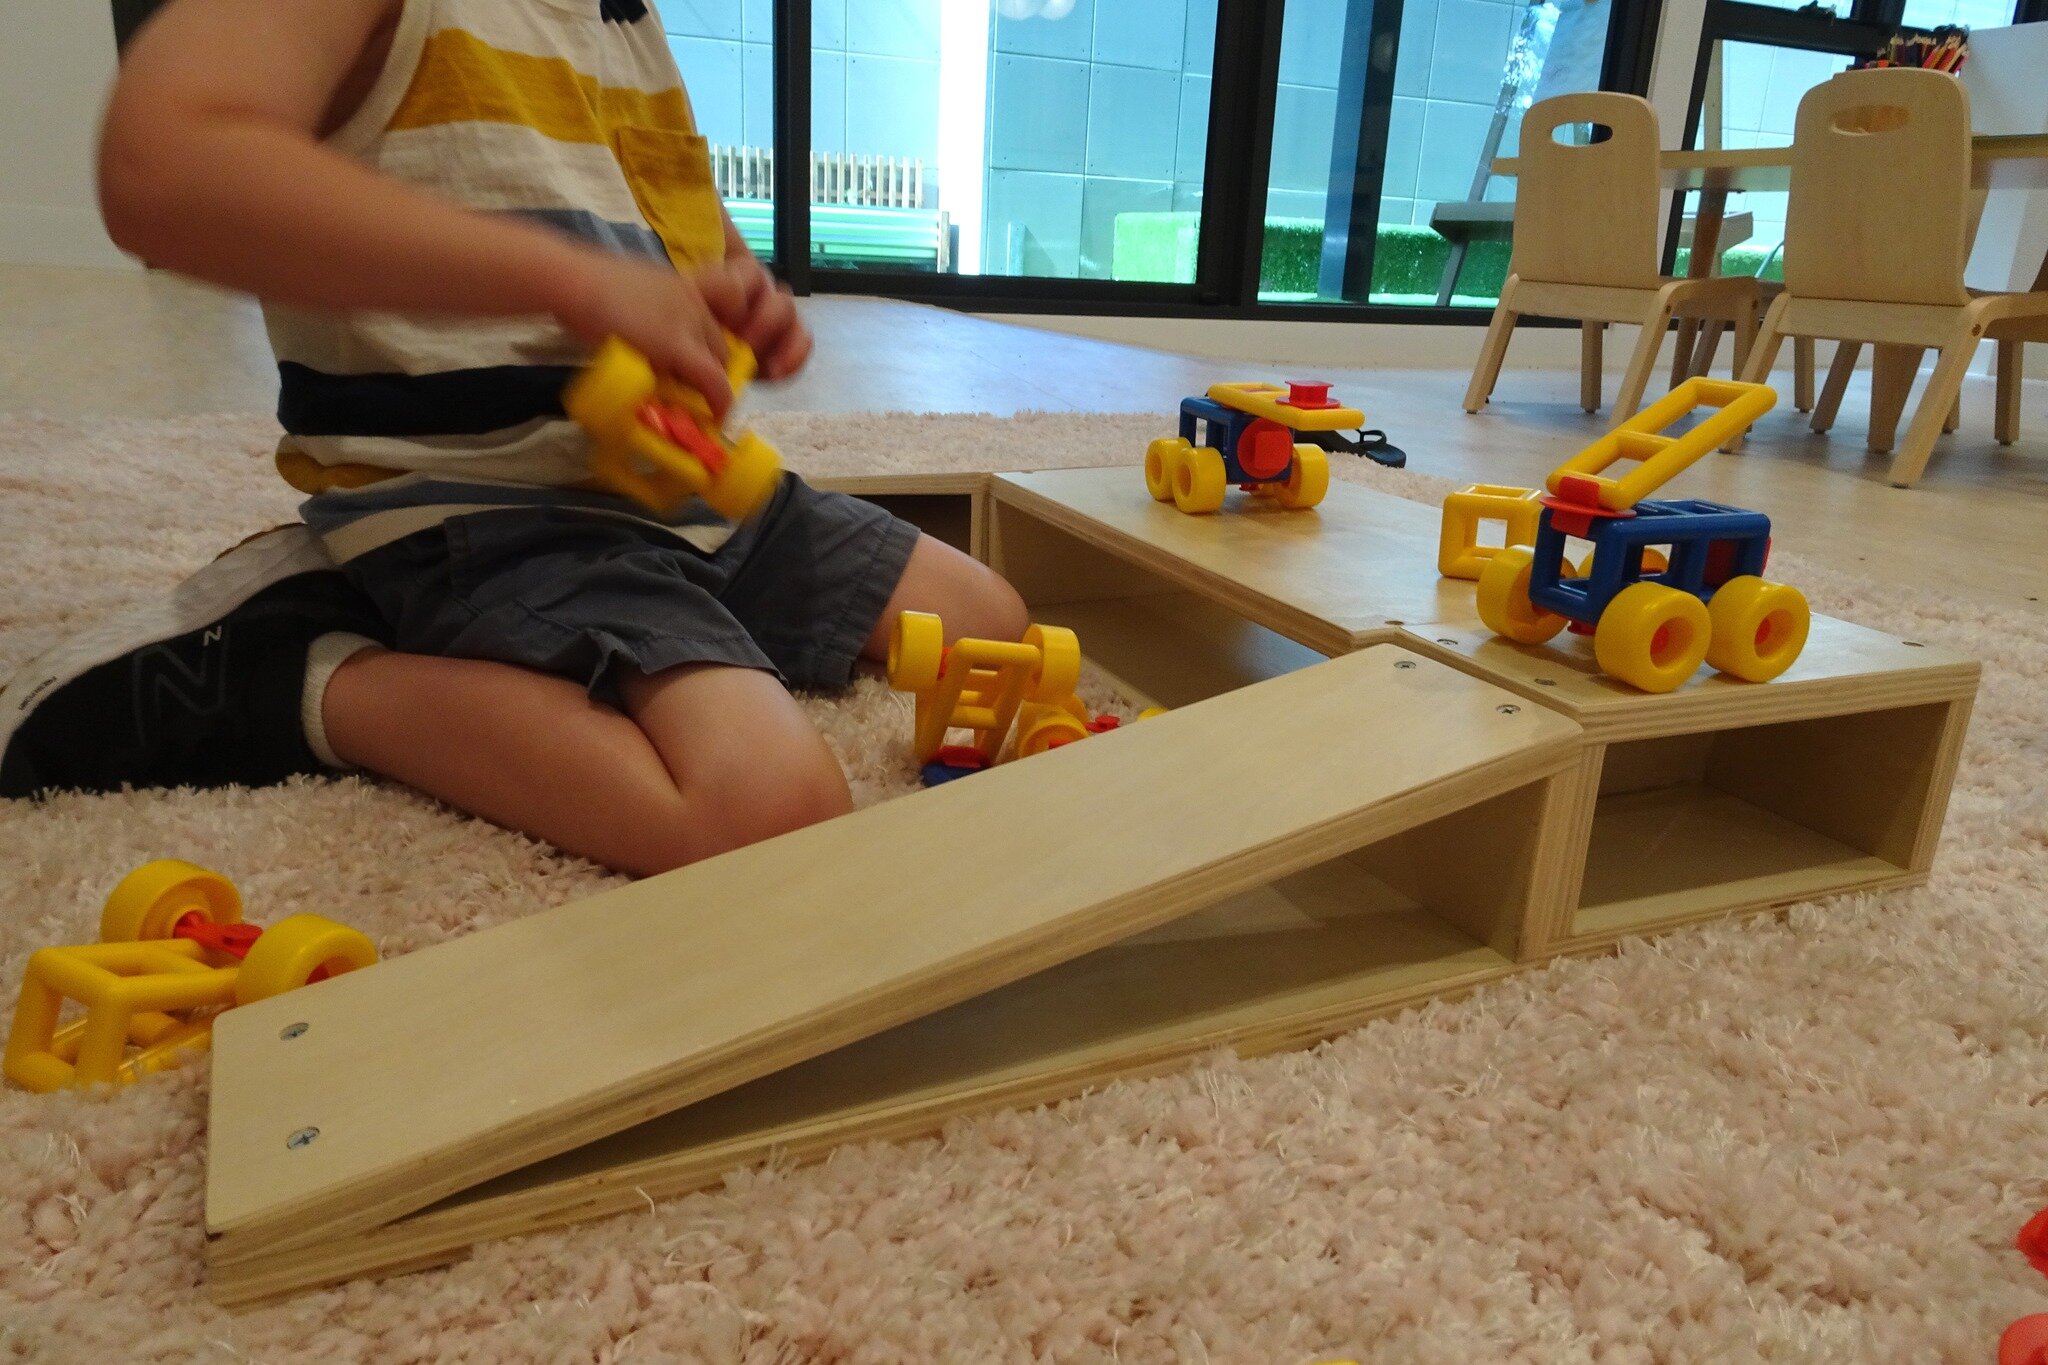 Mobilo has been a staple of Australian kindergartens and primary schools for decades! Children learn to grasp, balance and create wonderful objects and toys, at the same time using their imagination and developing motor skills. An inclusive construct